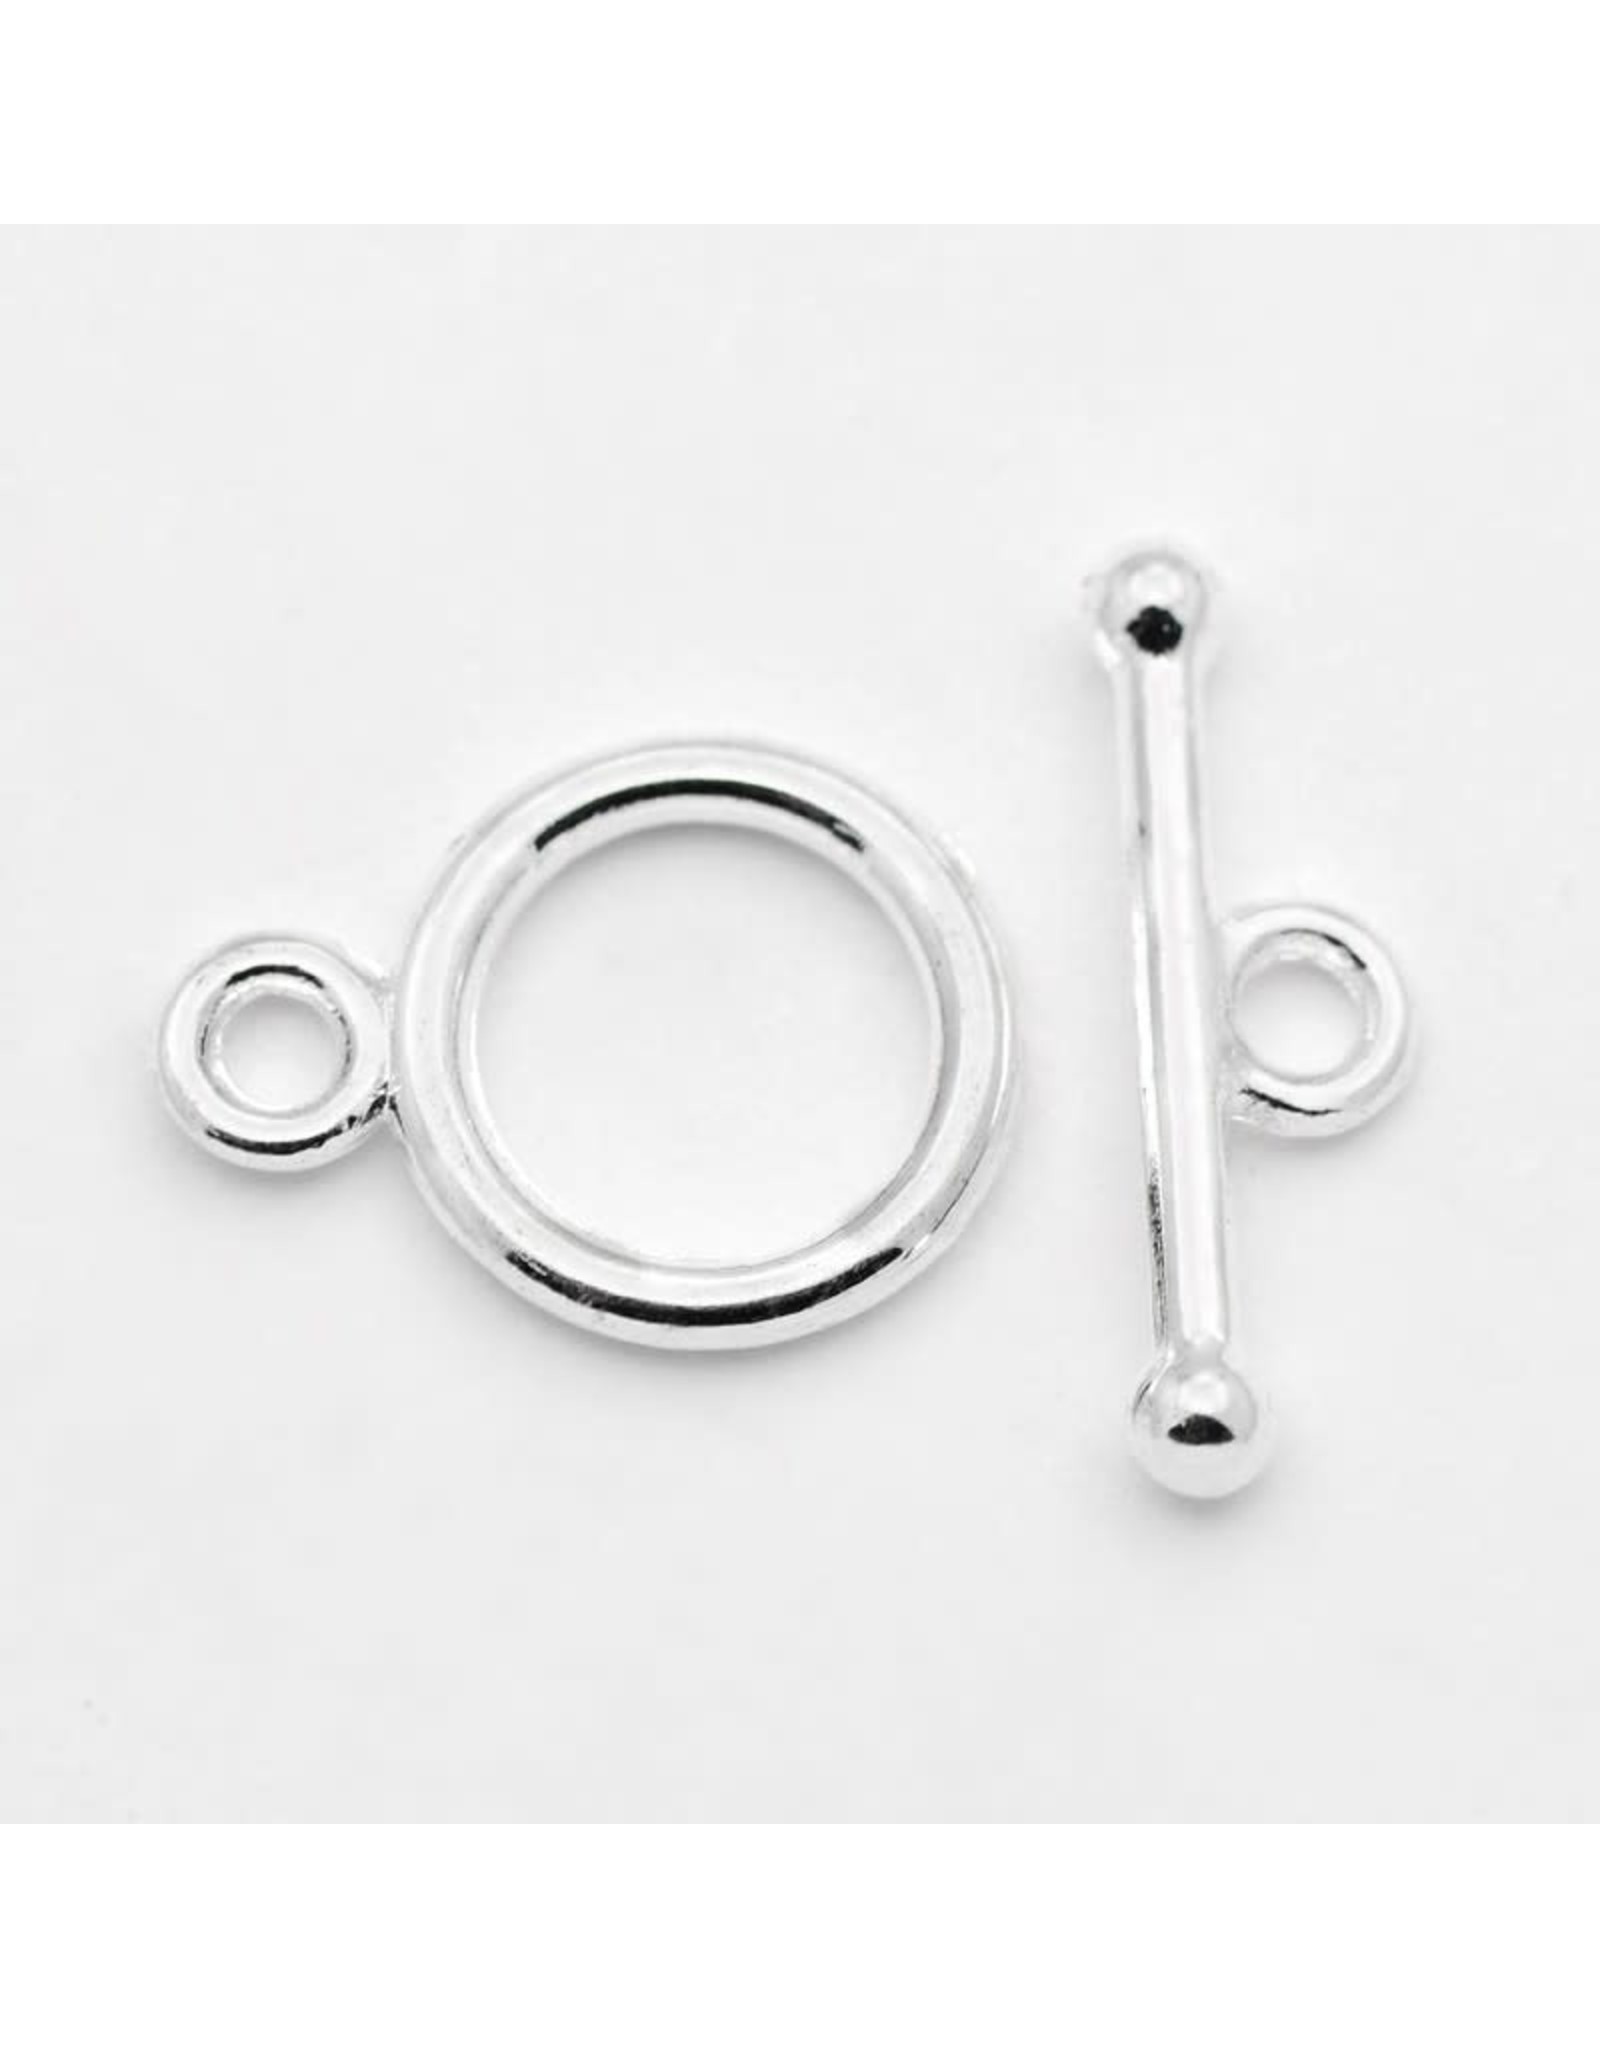 Toggle Clasp Round 10mm Silver  NF  x10